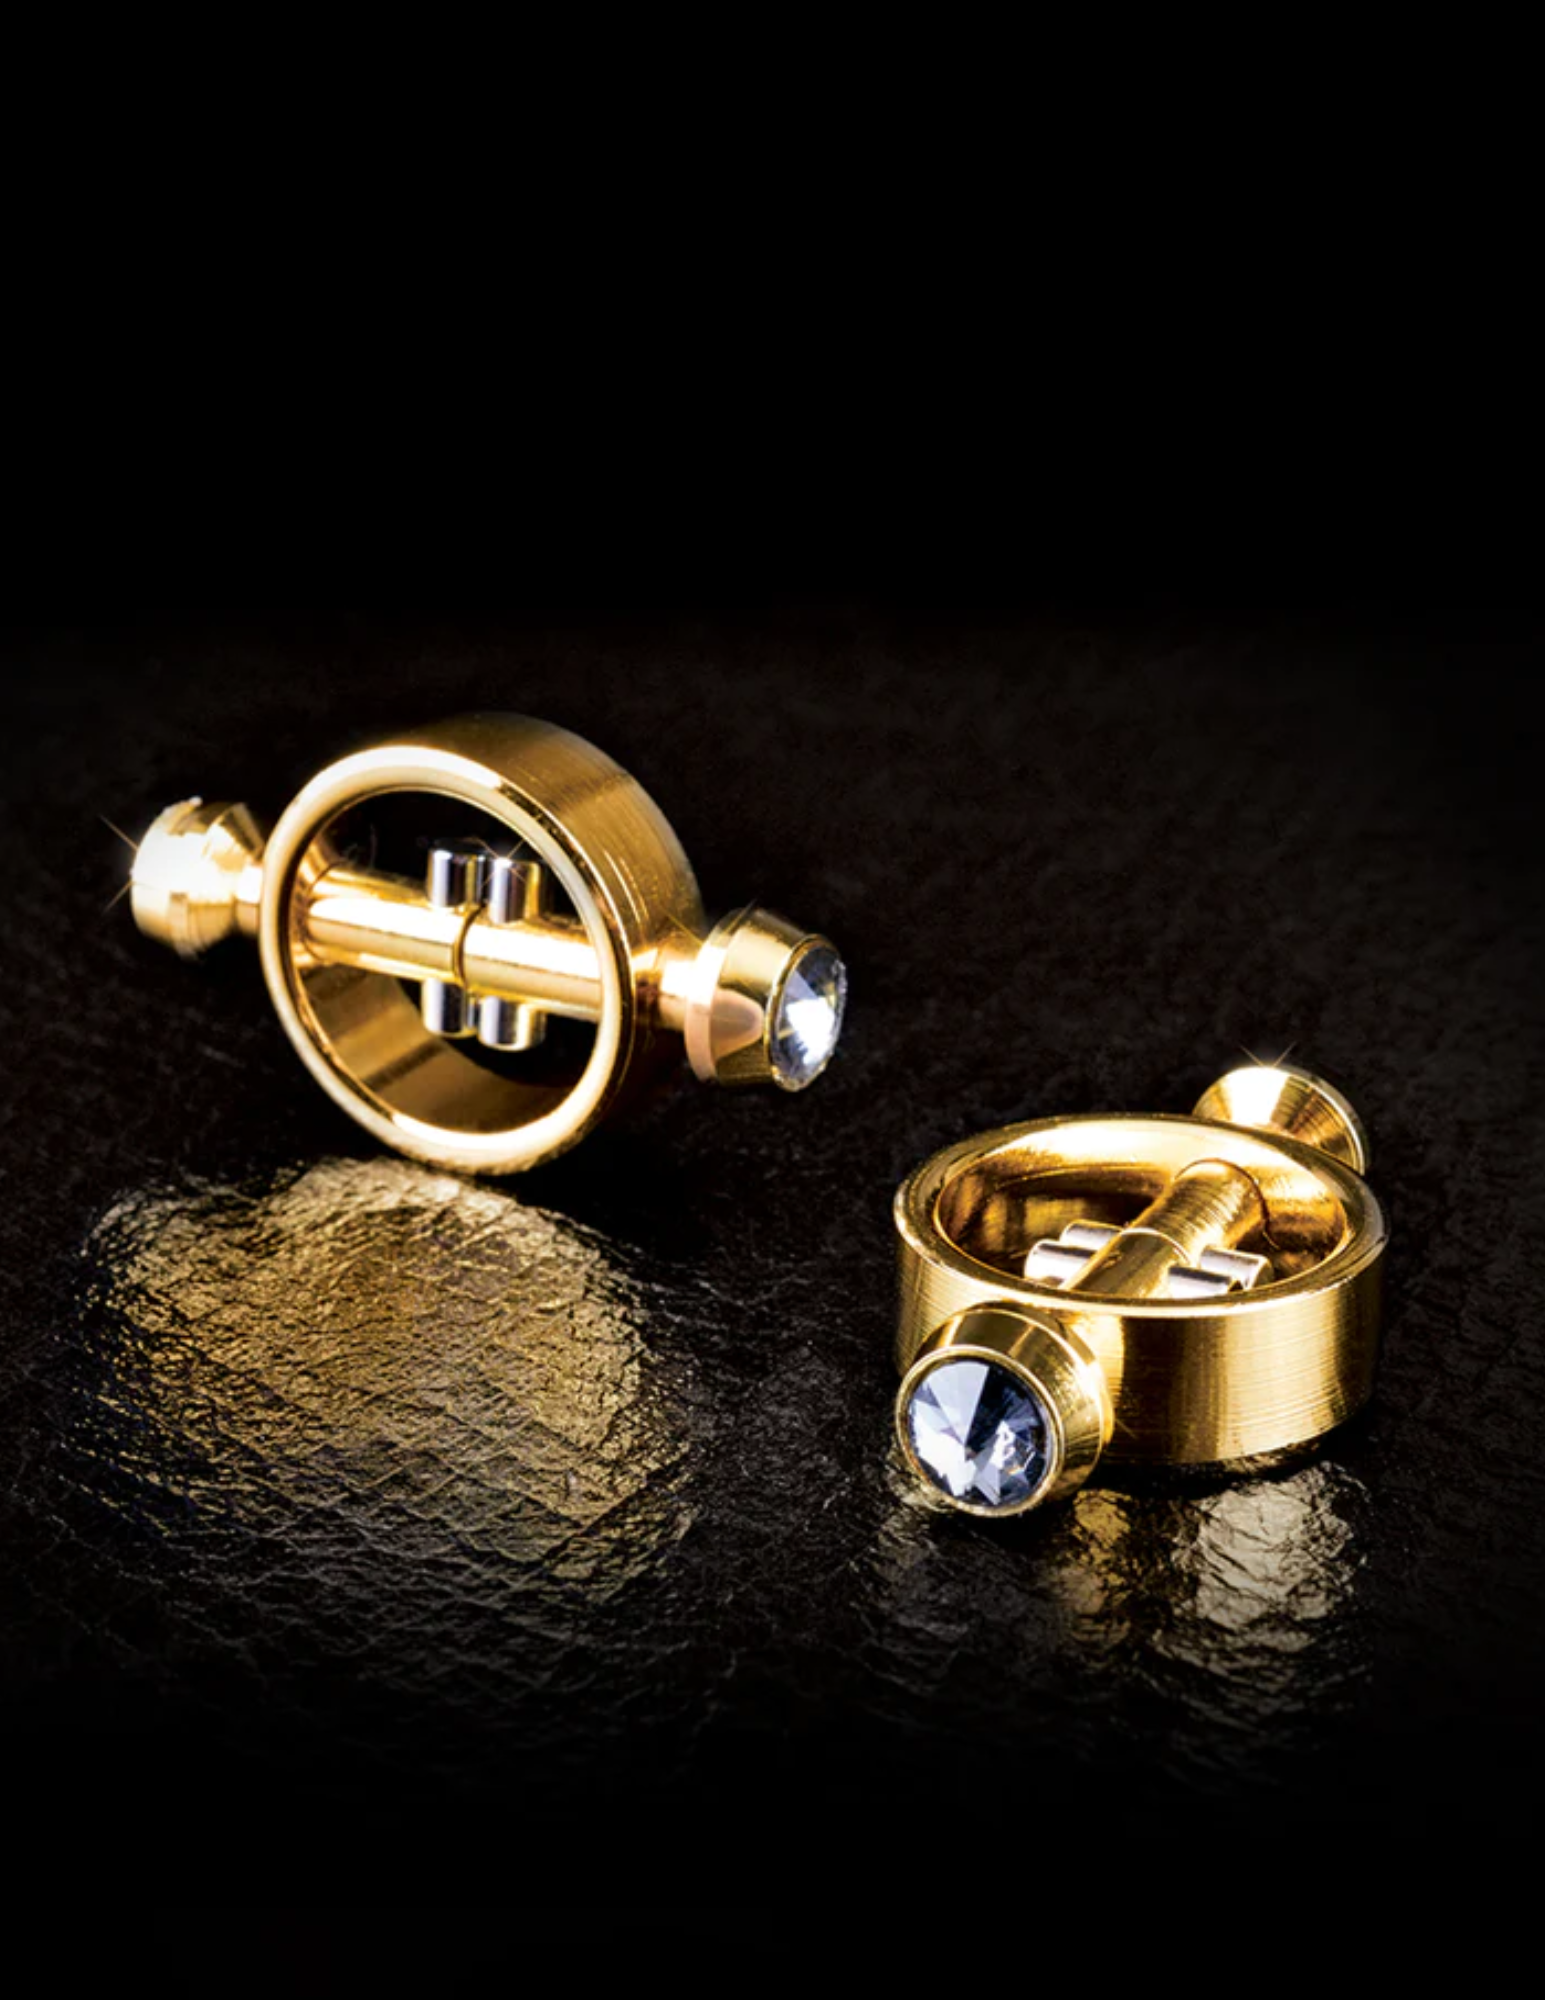 Photo shows the Fetish Fantasy Gold Magnetic Nipple Clamps from Pipedreams shows the gem accents as well as the sturdy gold hardware.